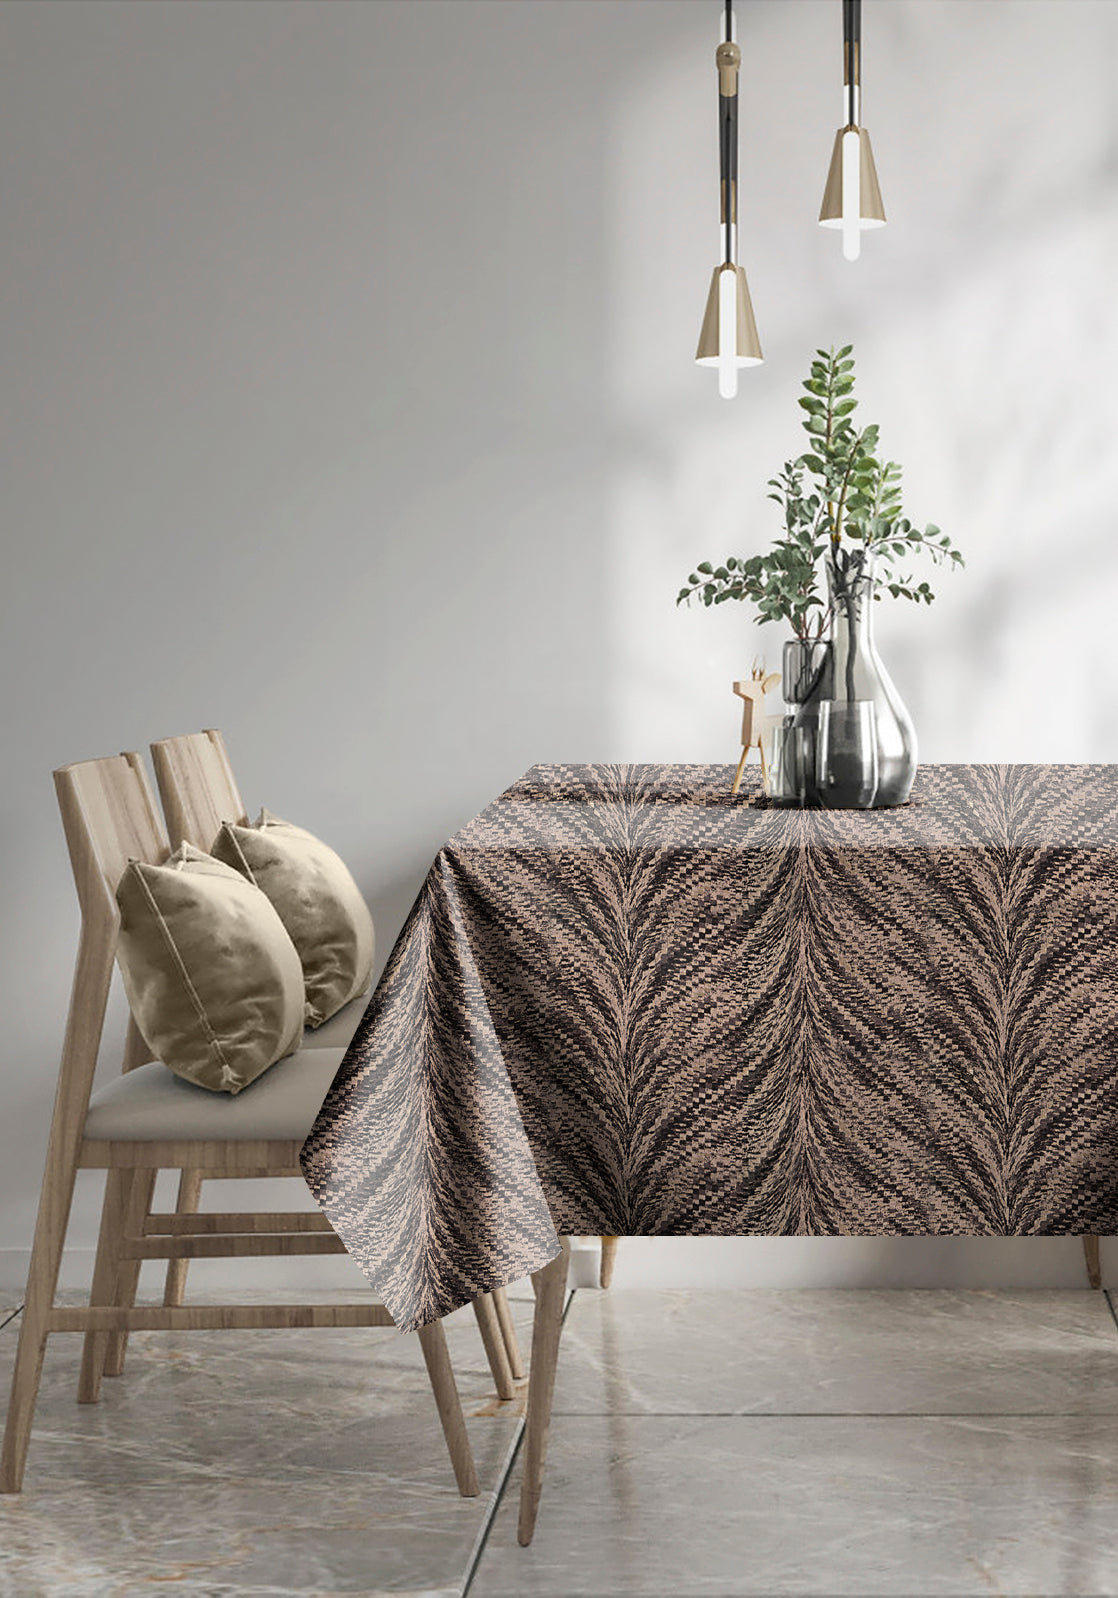 Luxor Charcoal 6 Seater Table Cloth